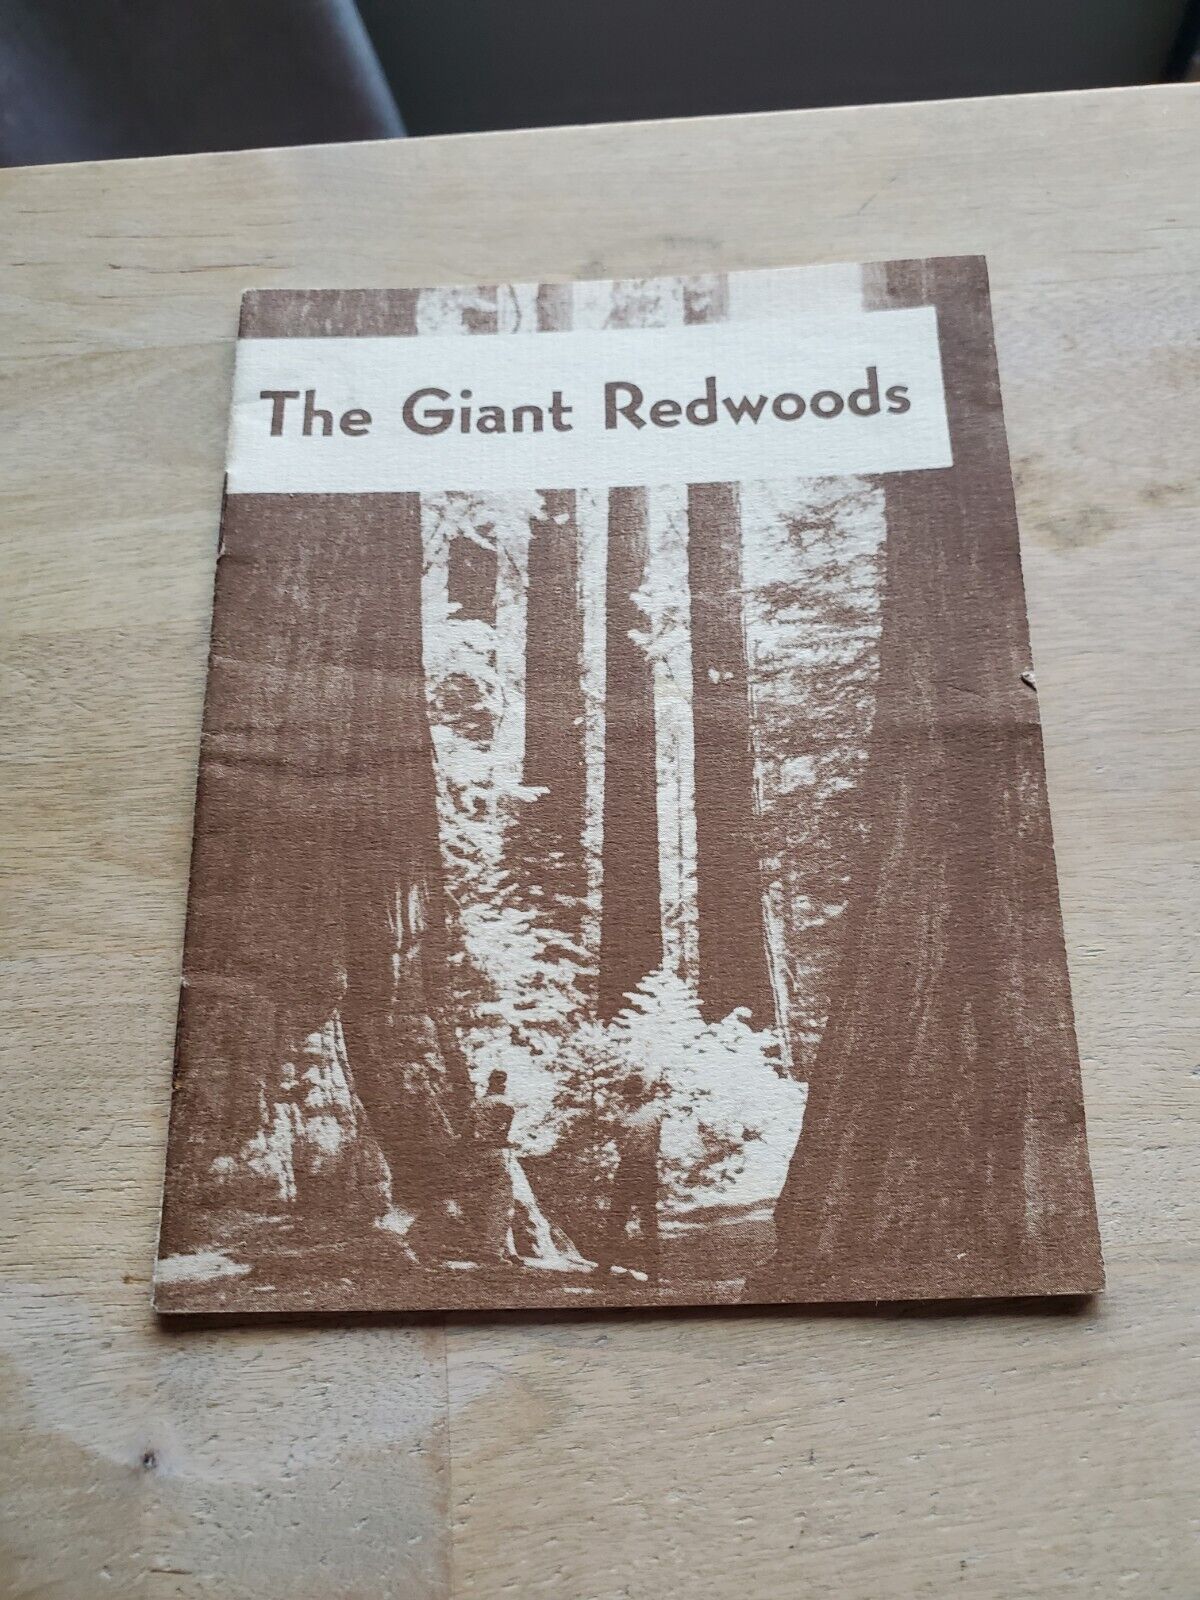 THE GIANT REDWOODS: HARRIET E. WEAVE: THREE RACOONS PRESS: '48